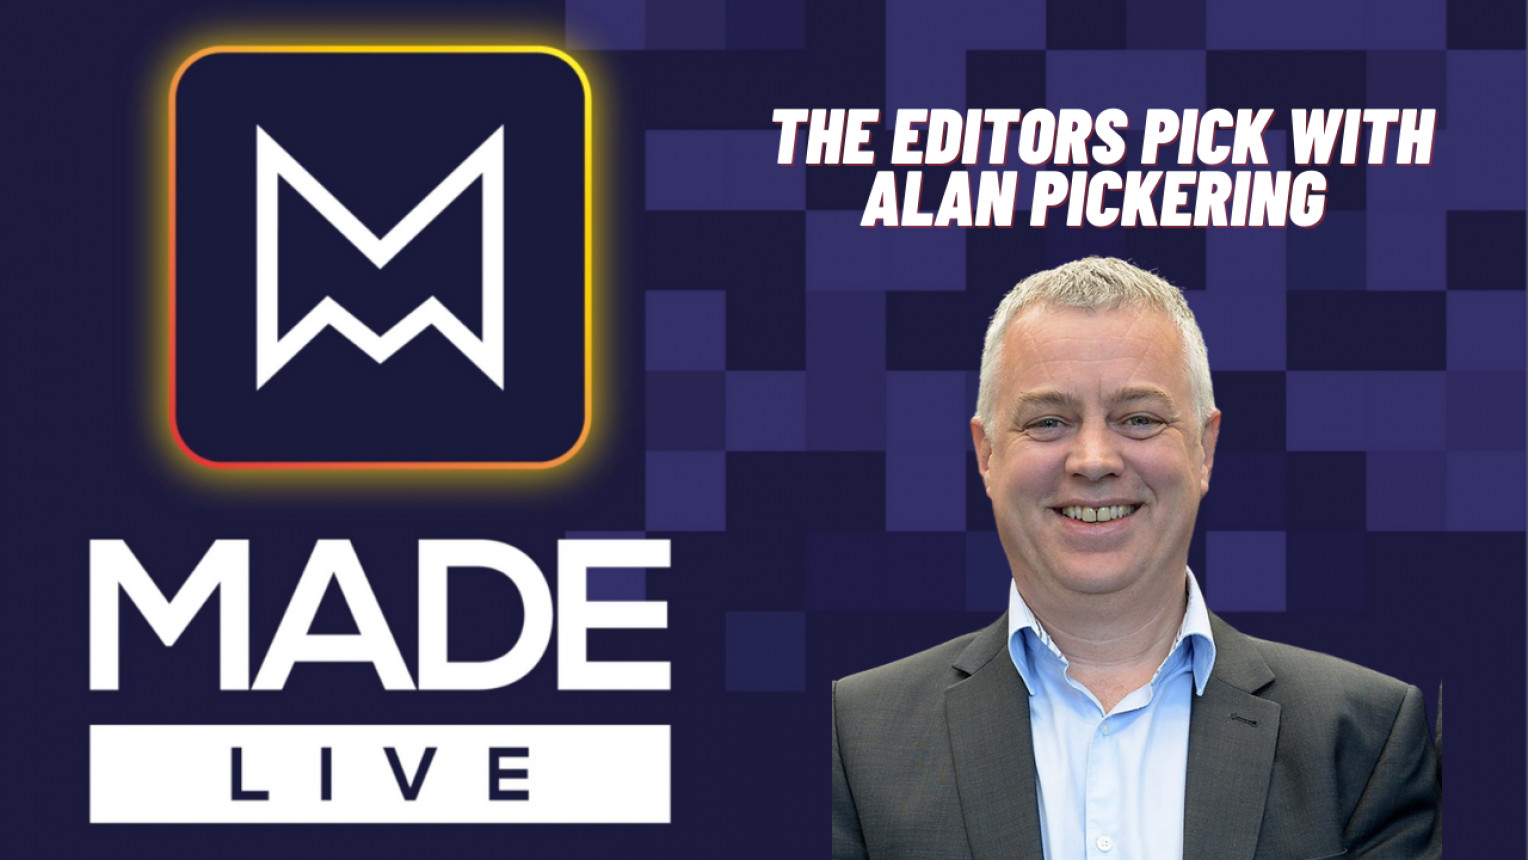 Made LIVE TV: The Editor's Pick with Alan Pickering